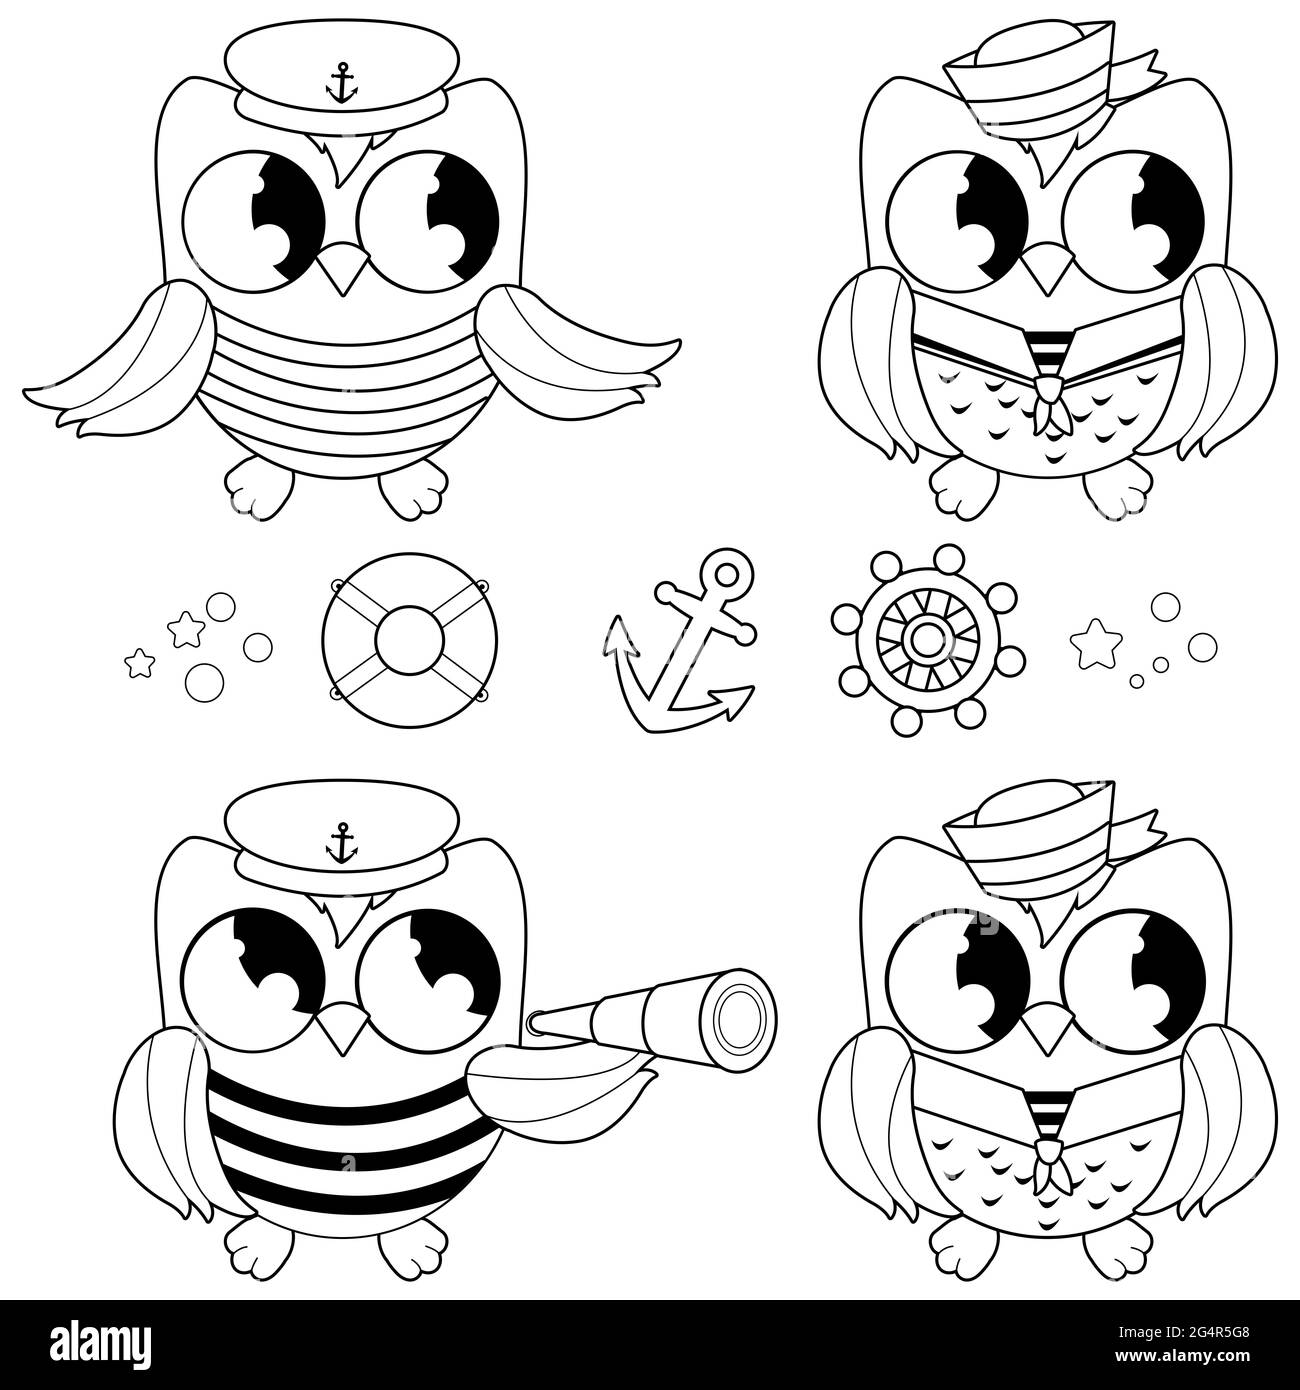 Sailor owls marine nautical set. Black and white coloring page Stock Photo